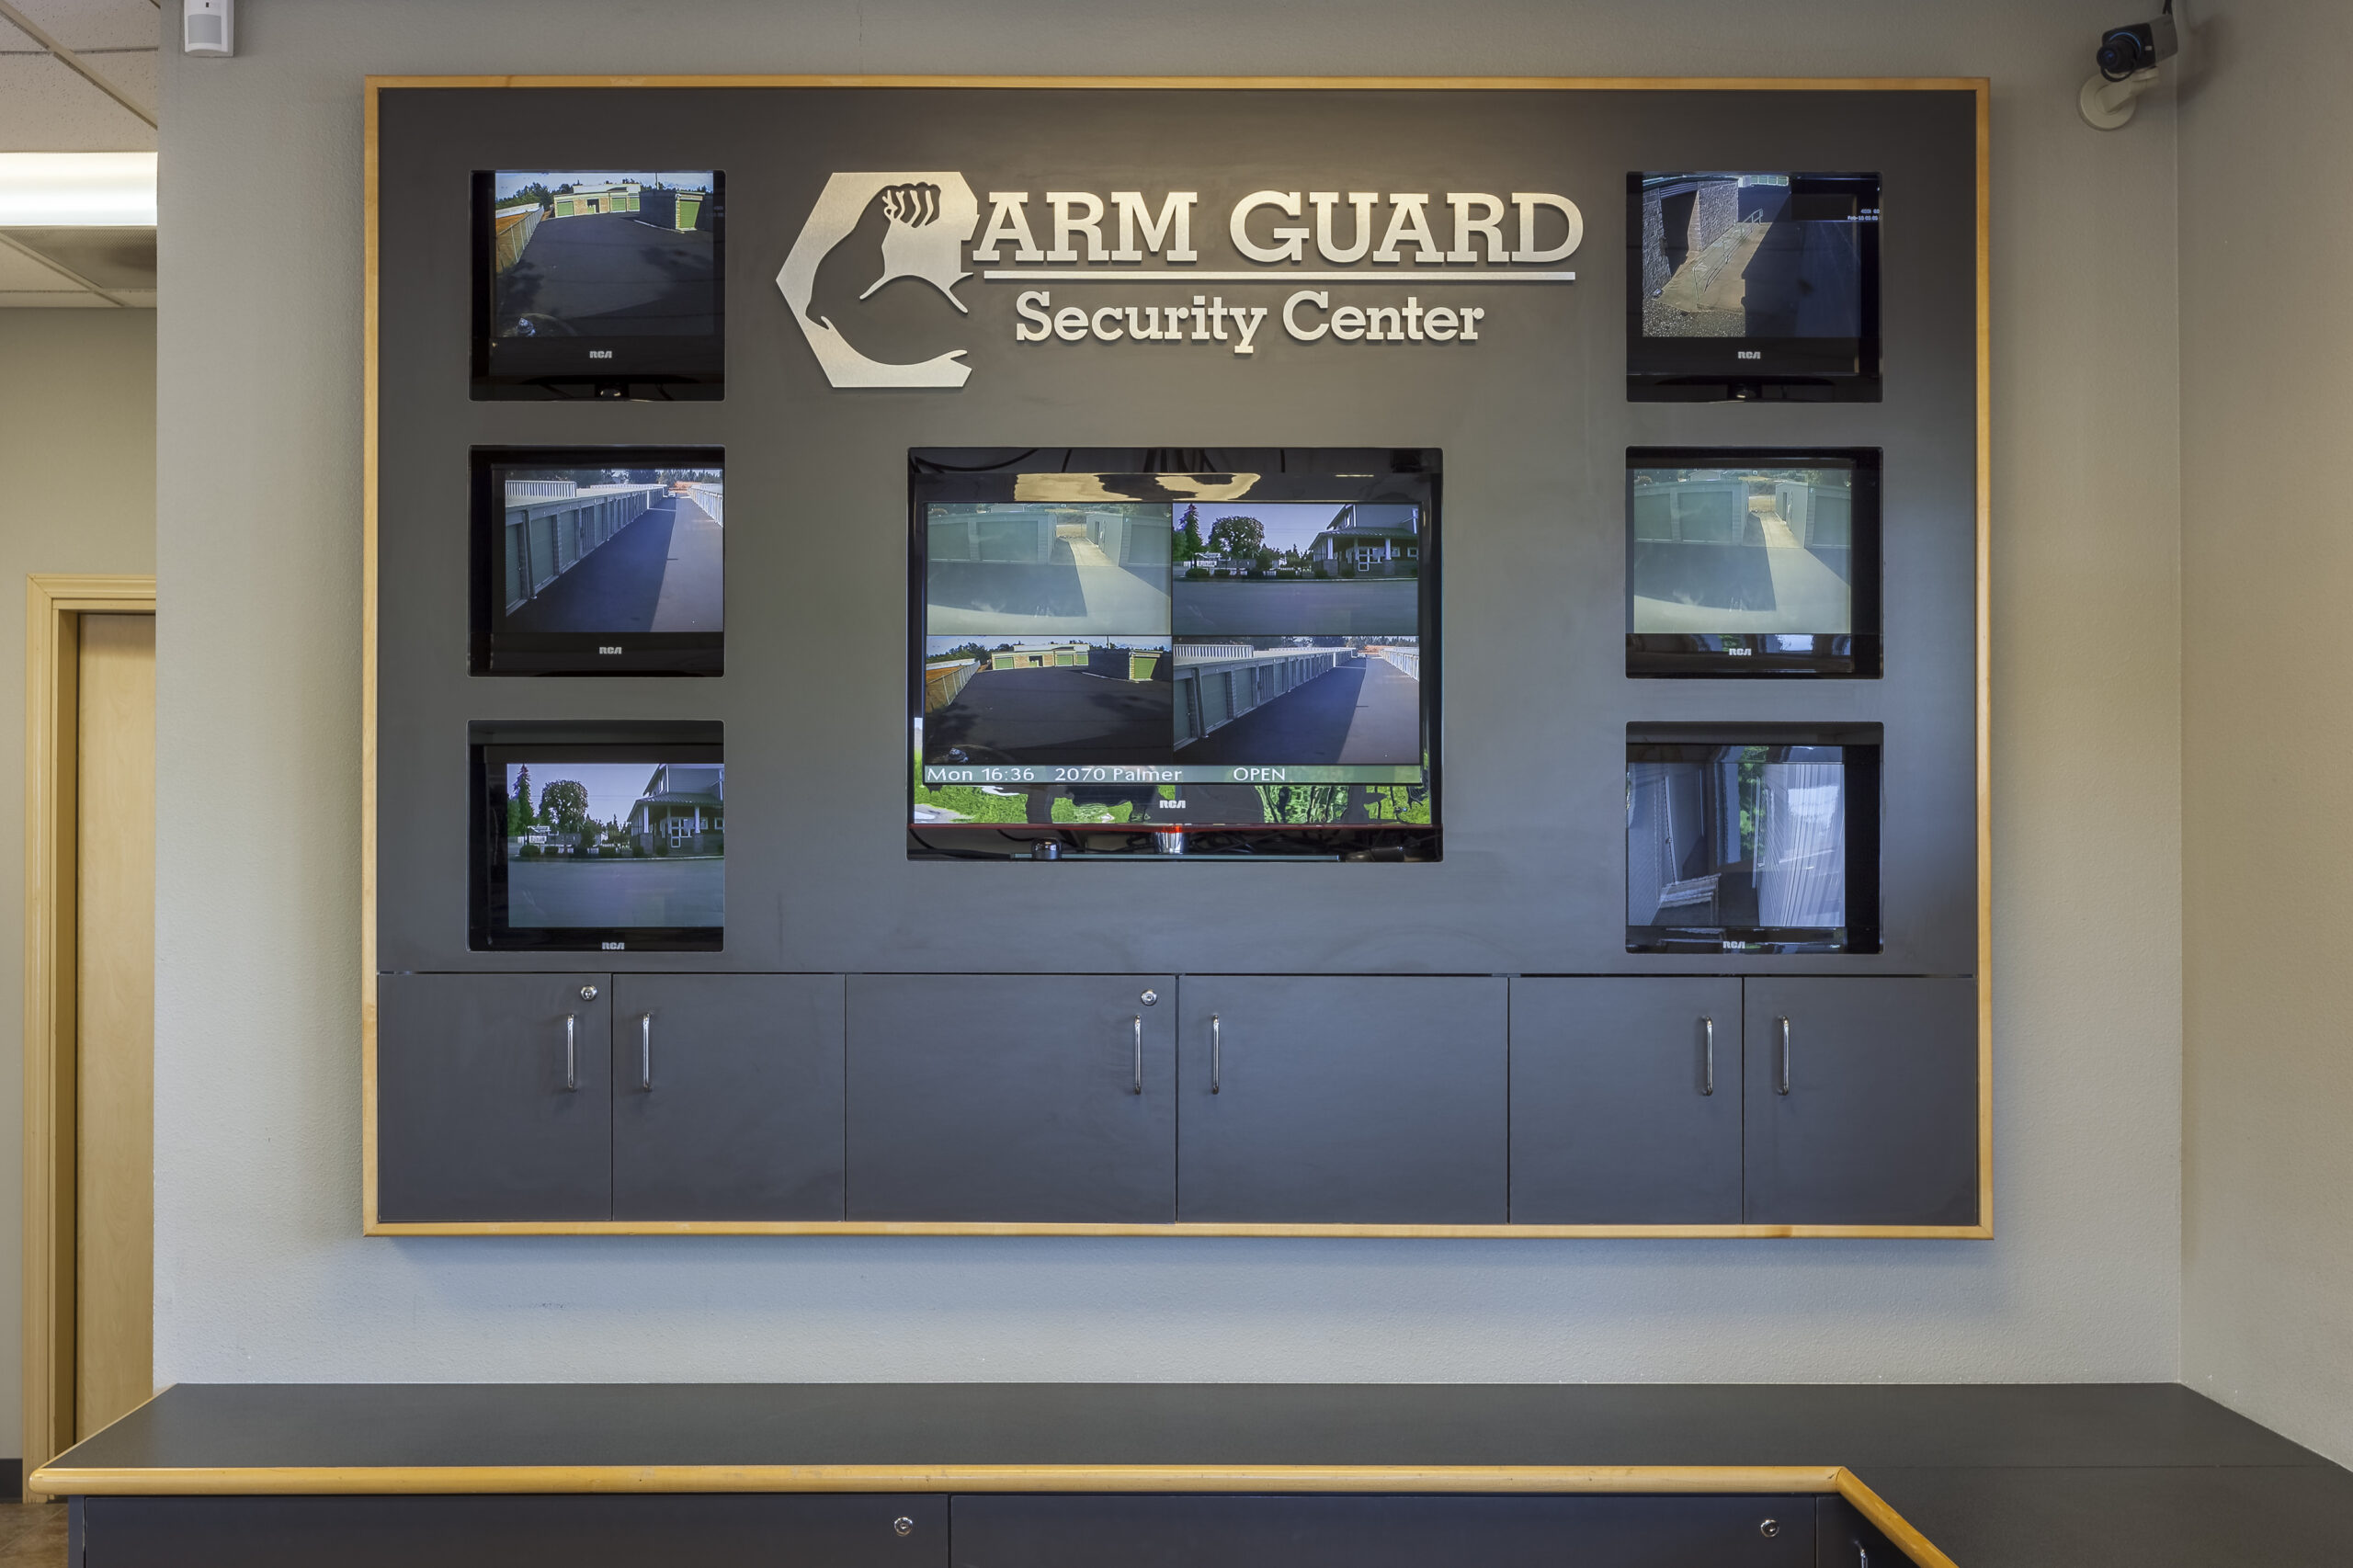 Security footage on display in the front office of a storage facility.